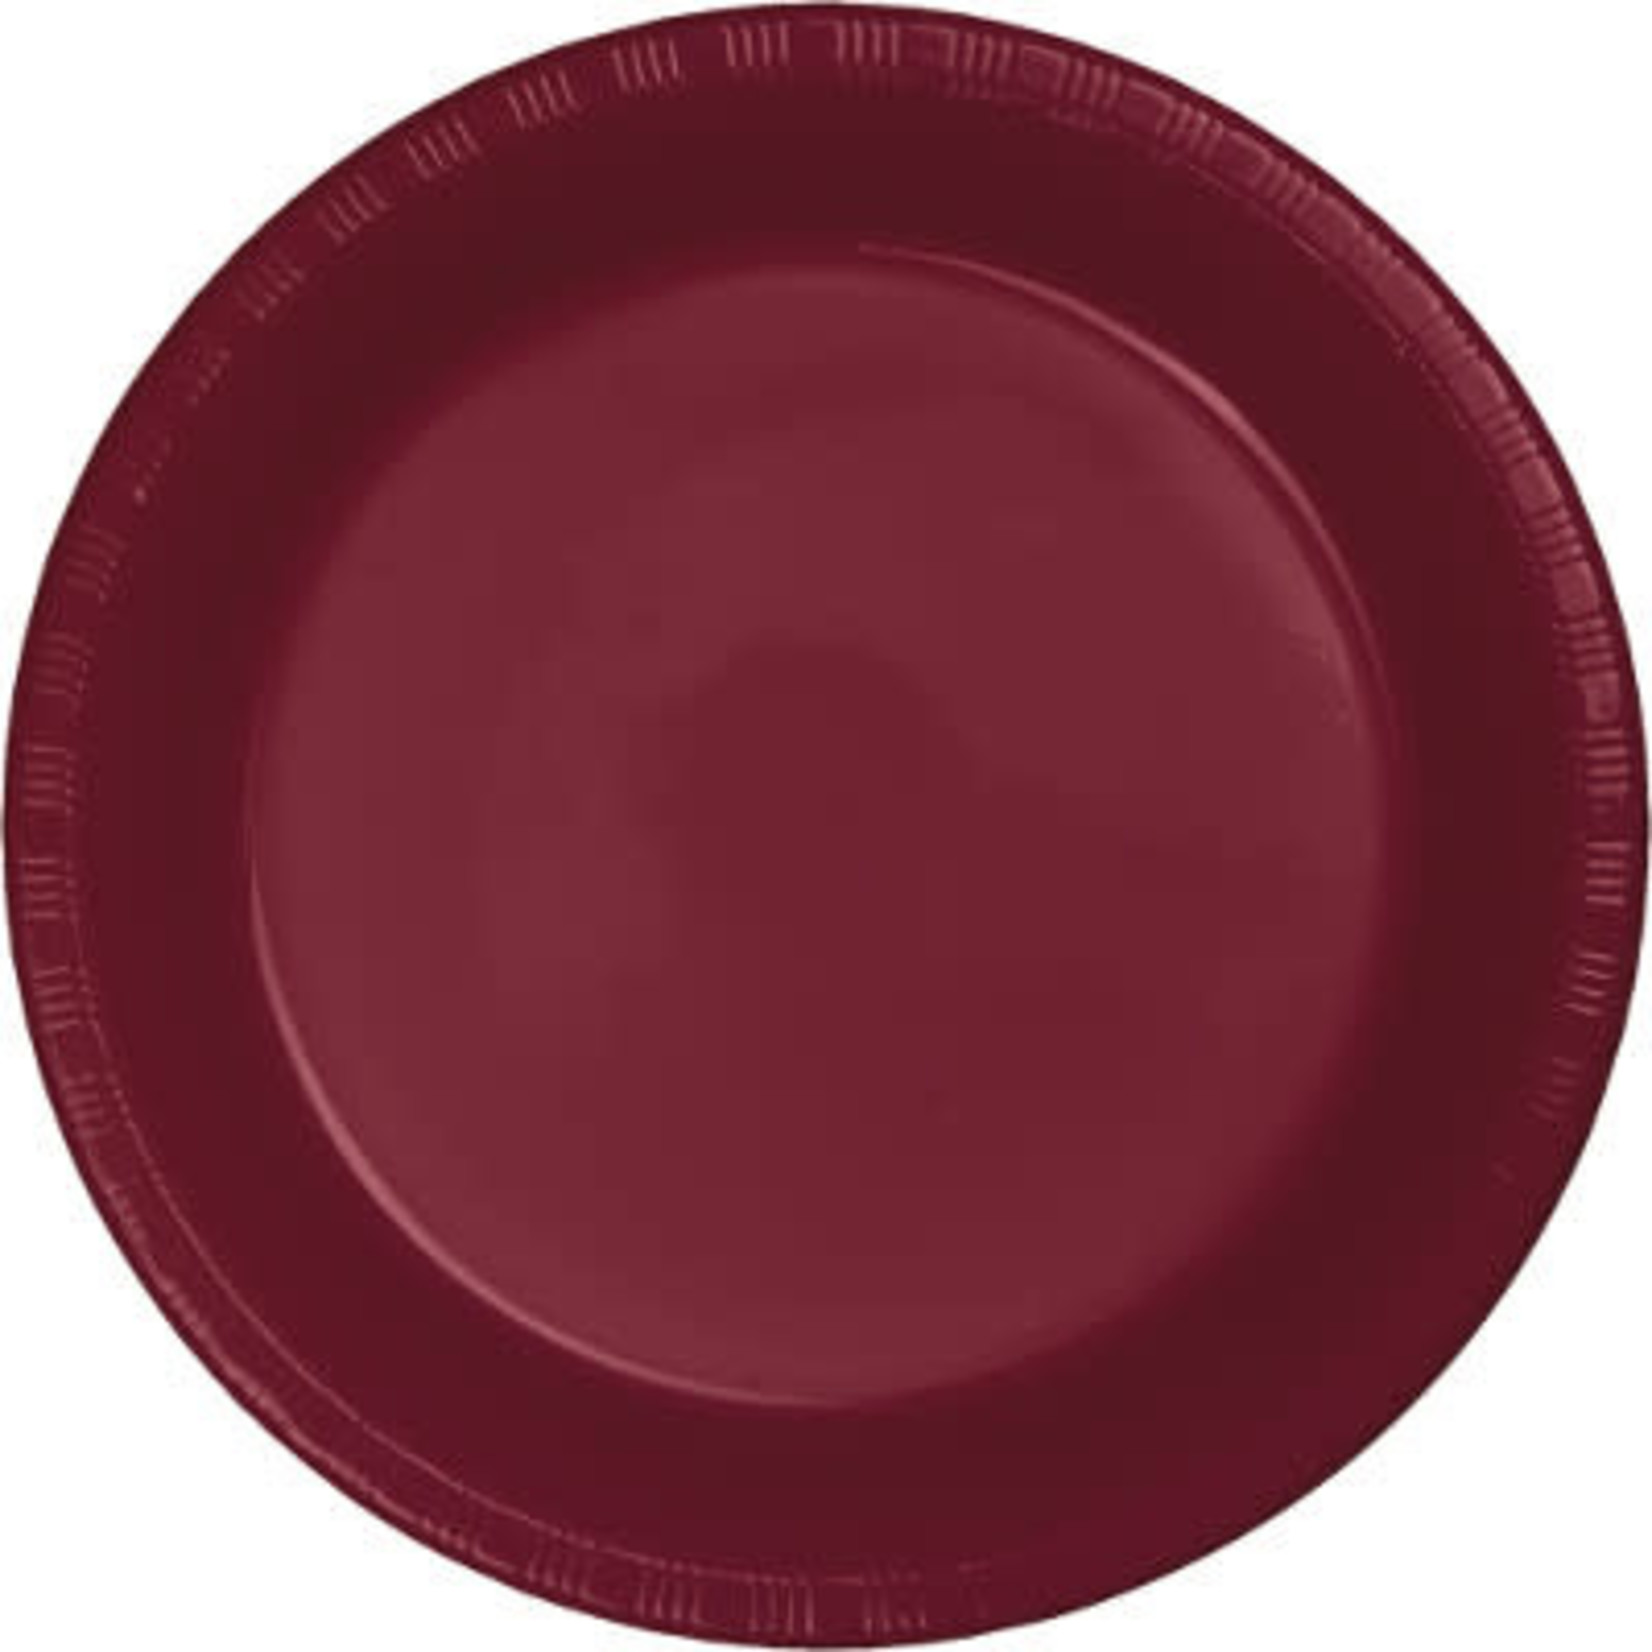 Touch of Color 10" Burgundy Plastic Banquet Plates - 20ct.